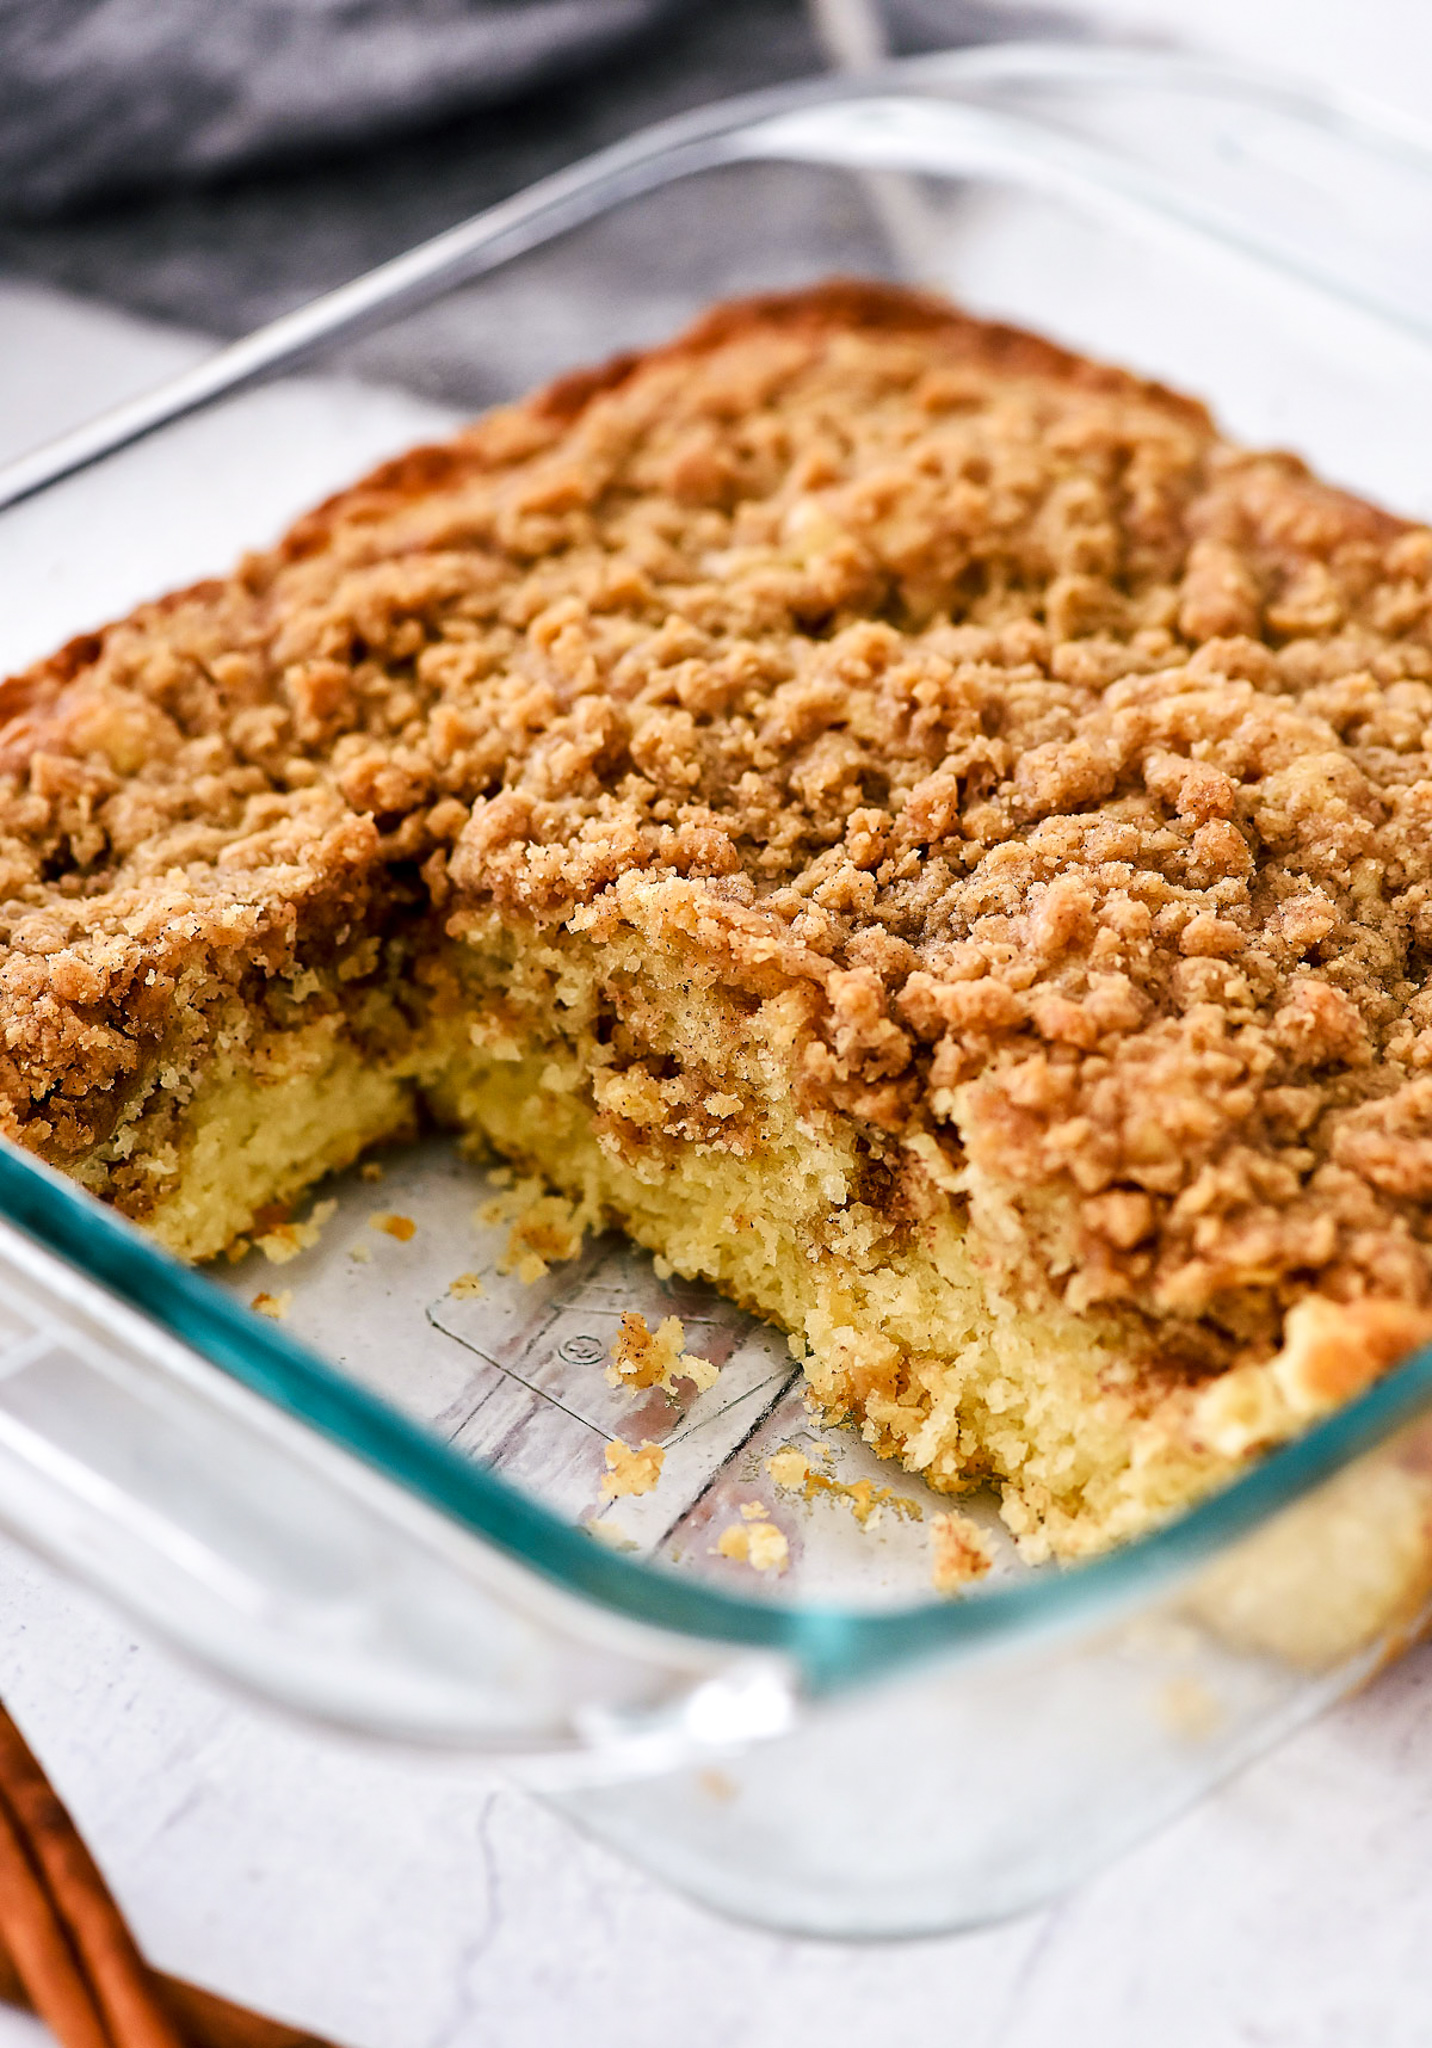 The Best Coffee Cake